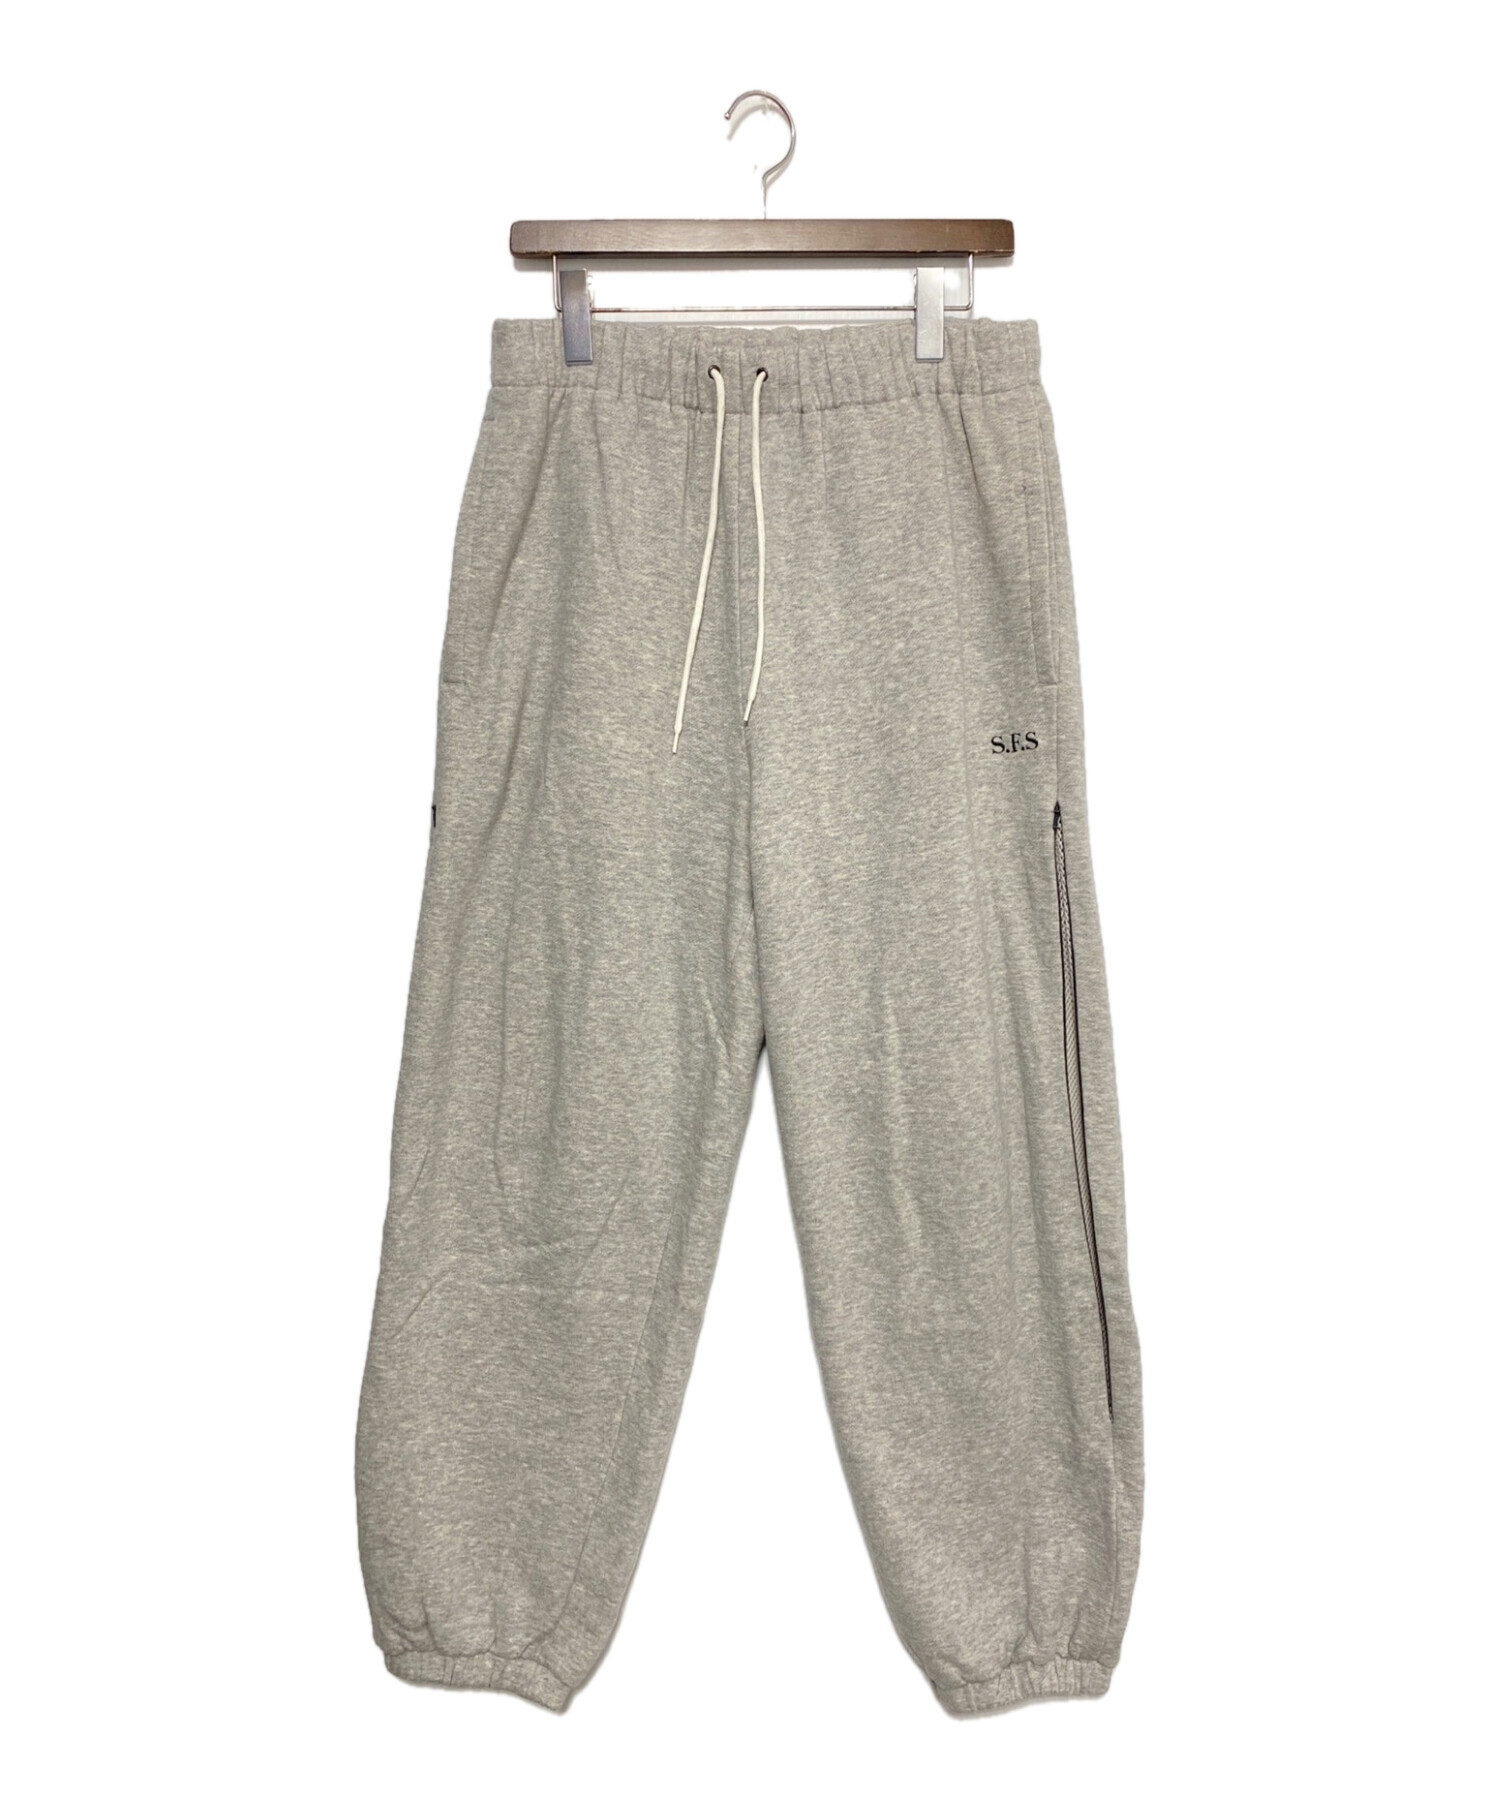 Private brand by S.F.S sweat pants 別注カラー - その他